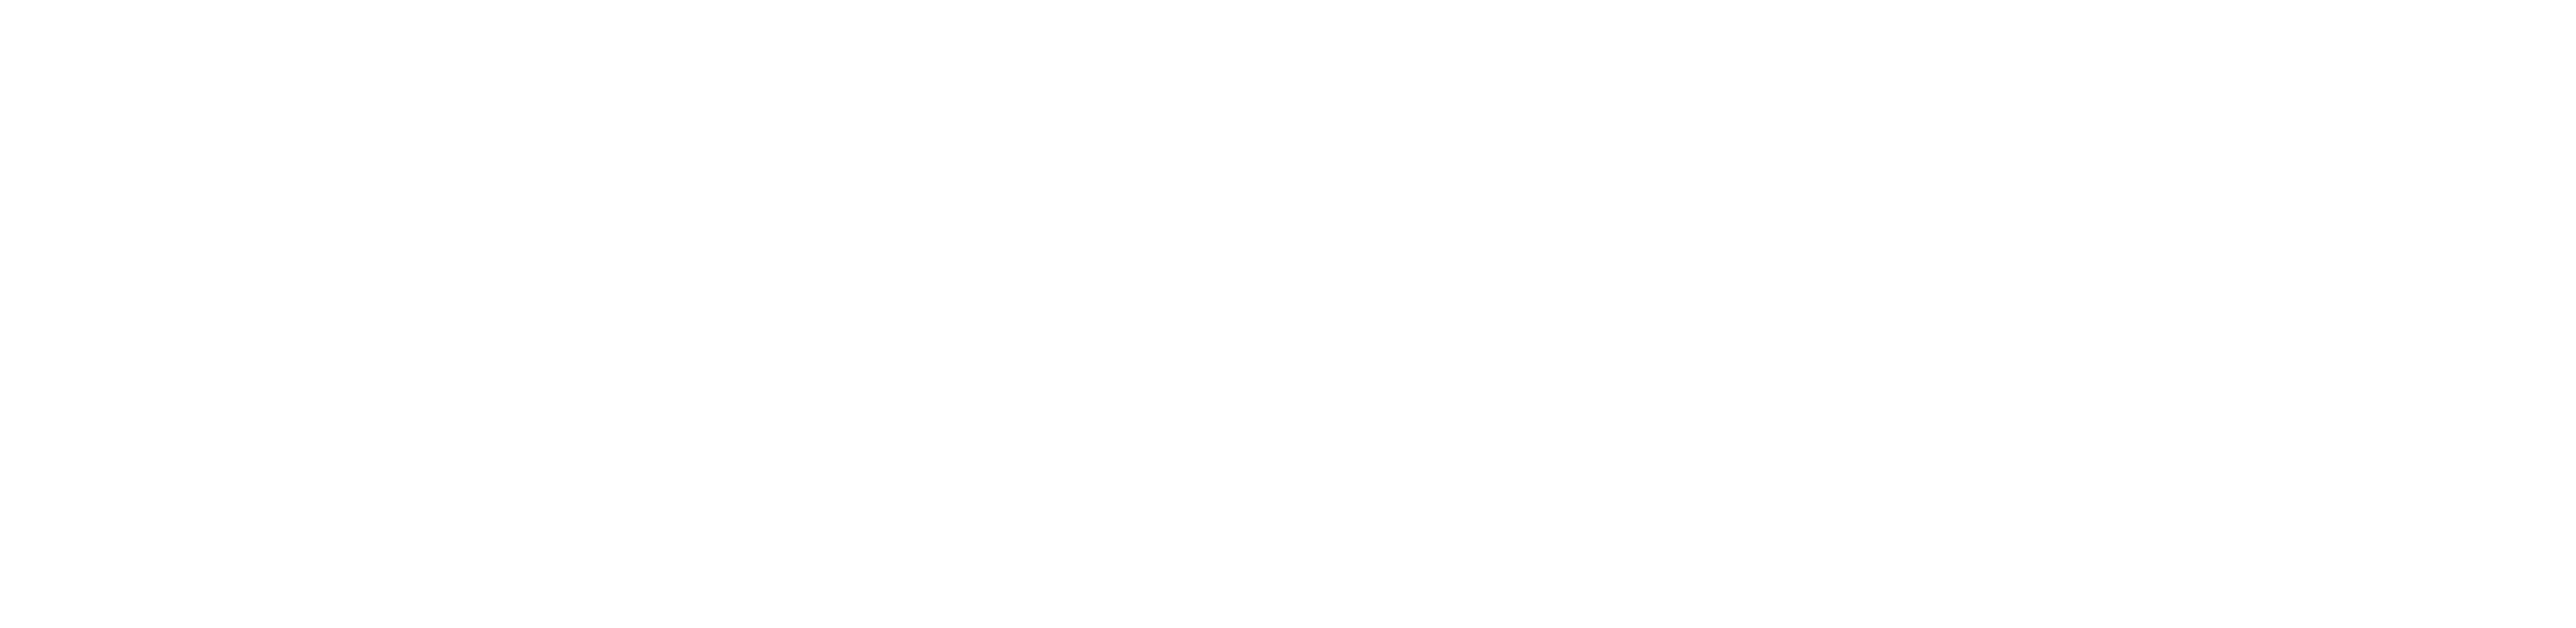 text that reads 'a summer of timeless elegance'